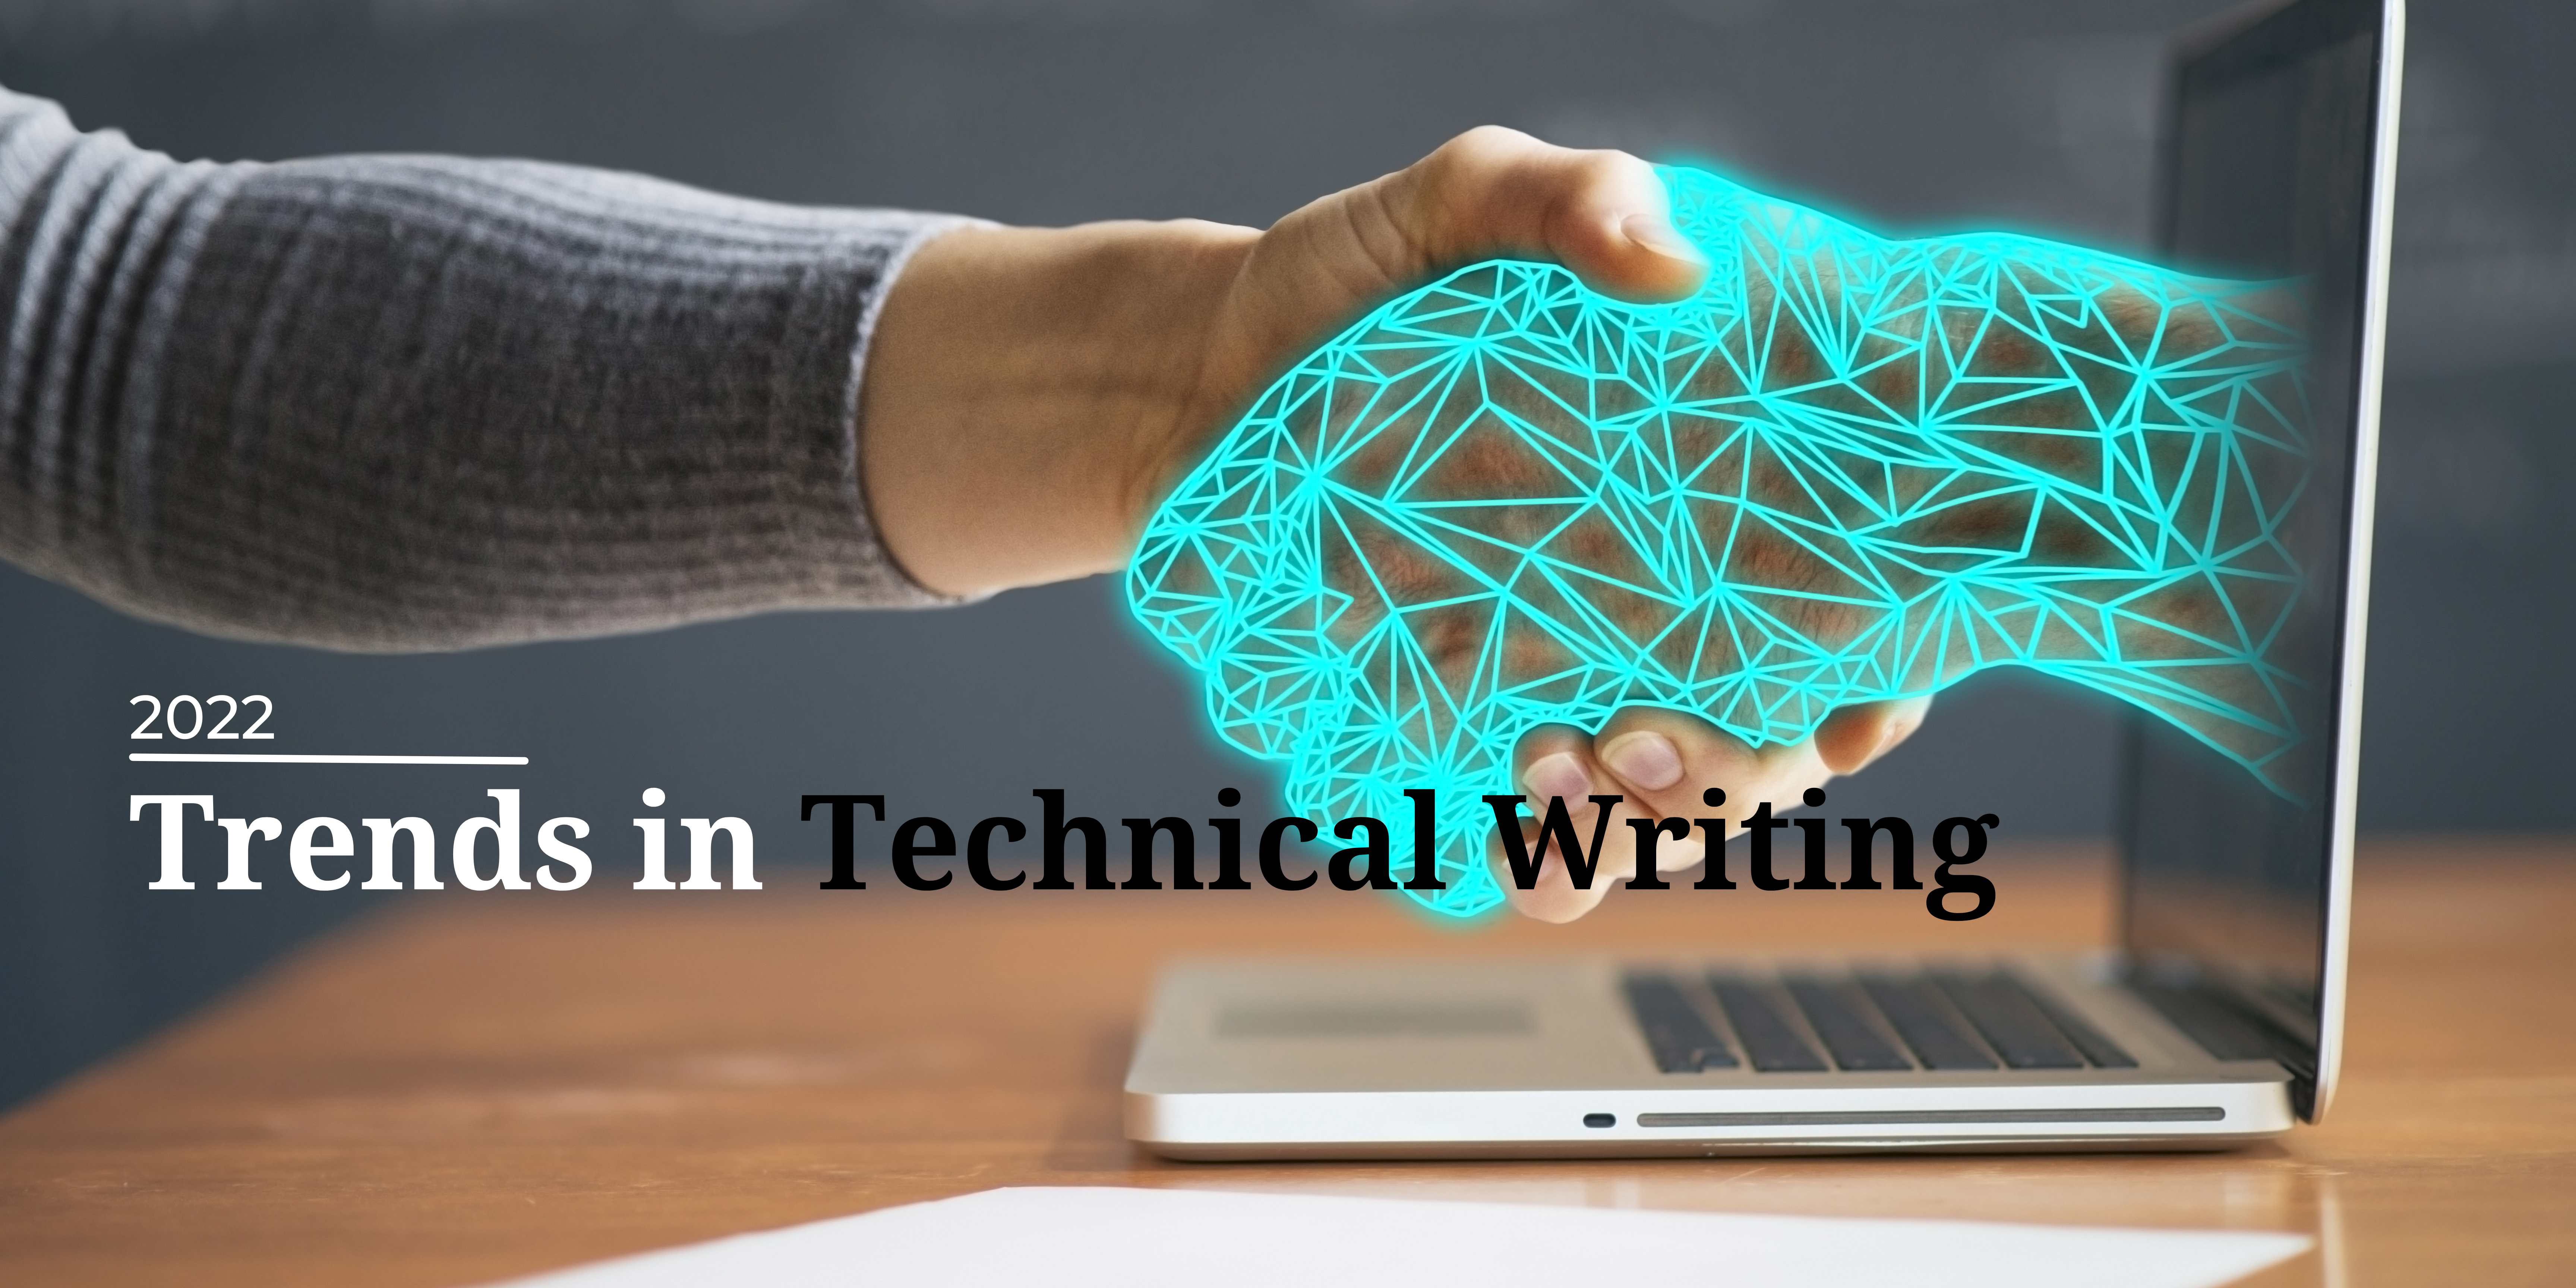 7 new trends in Technical Writing to know in 2023